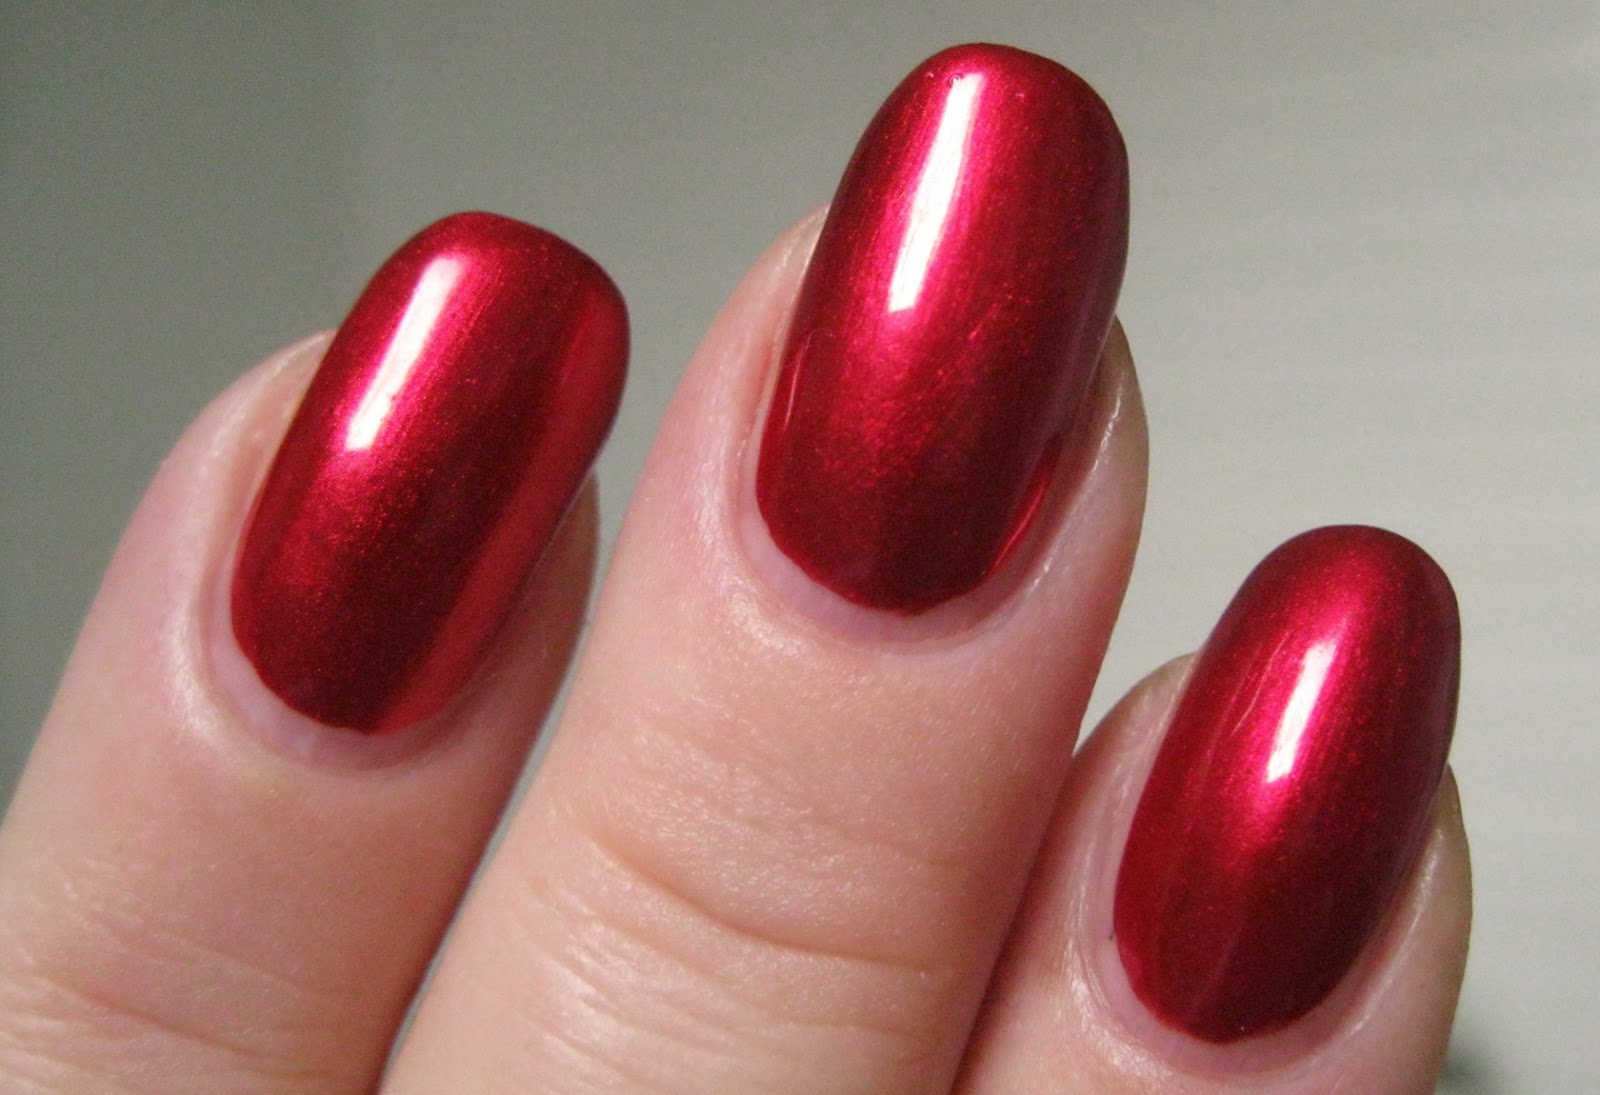 8. Butter London Nail Lacquer in "Knees Up" - wide 6